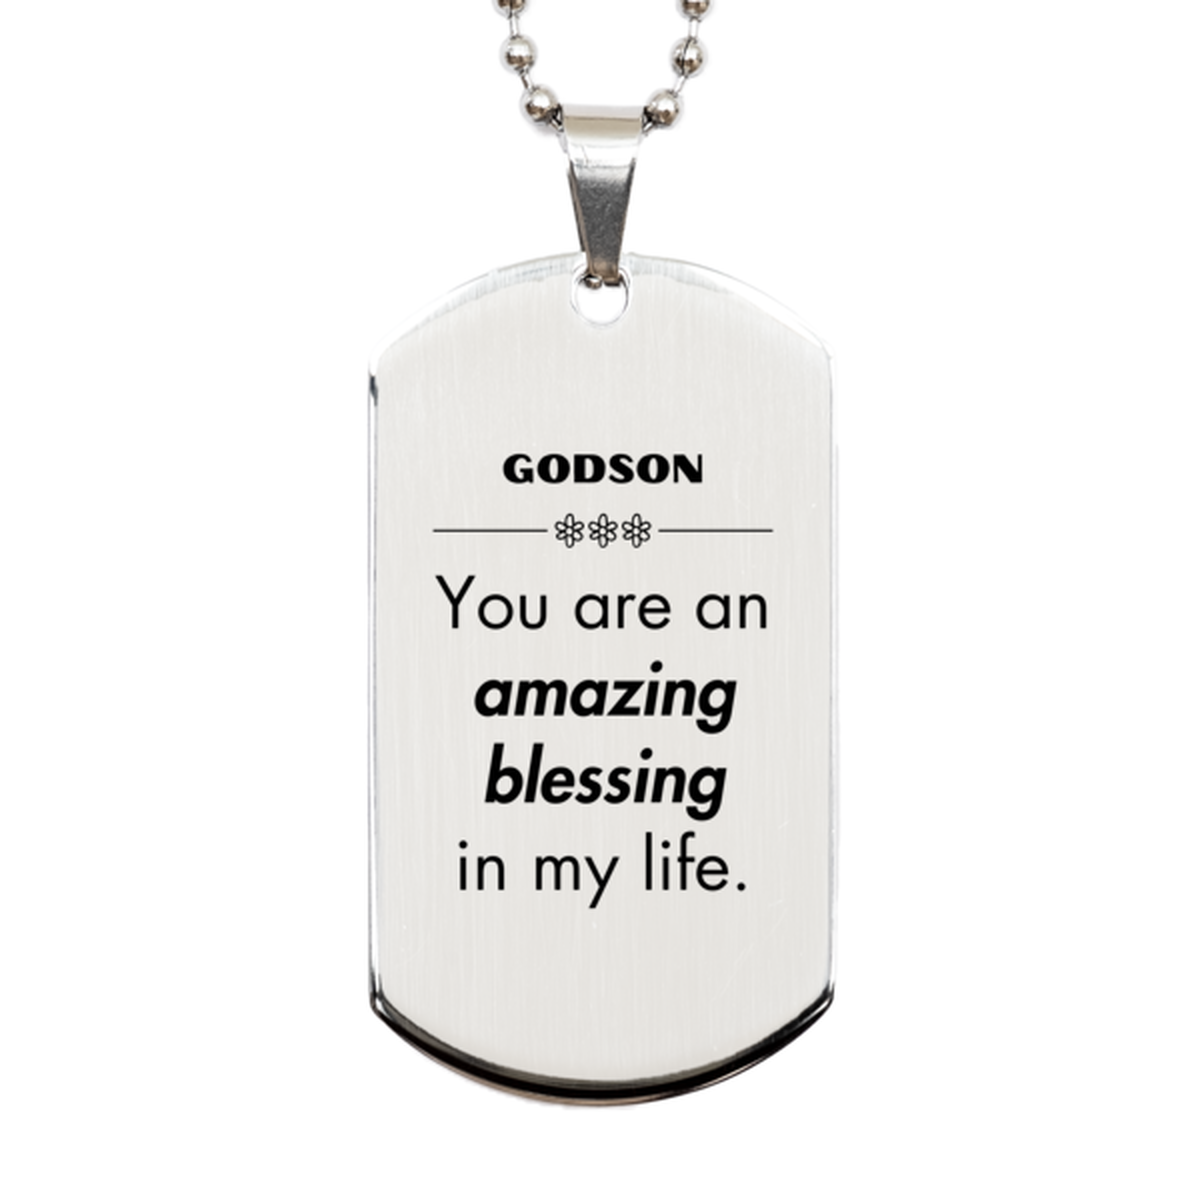 Godson Silver Dog Tag, You are an amazing blessing in my life, Thank You Gifts For Godson, Inspirational Birthday Christmas Unique Gifts For Godson